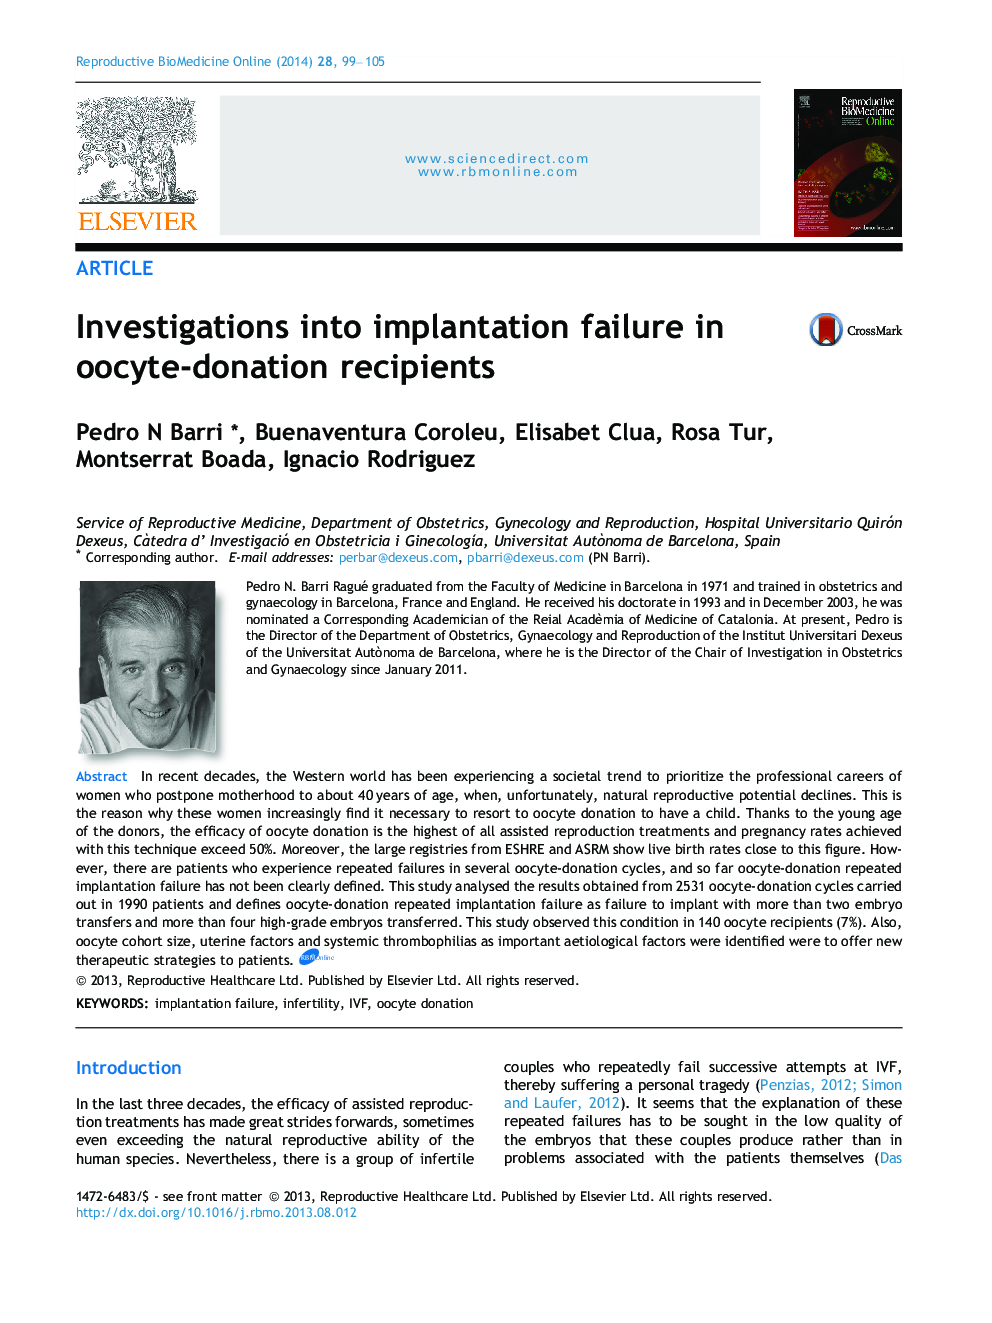 Investigations into implantation failure in oocyte-donation recipients 